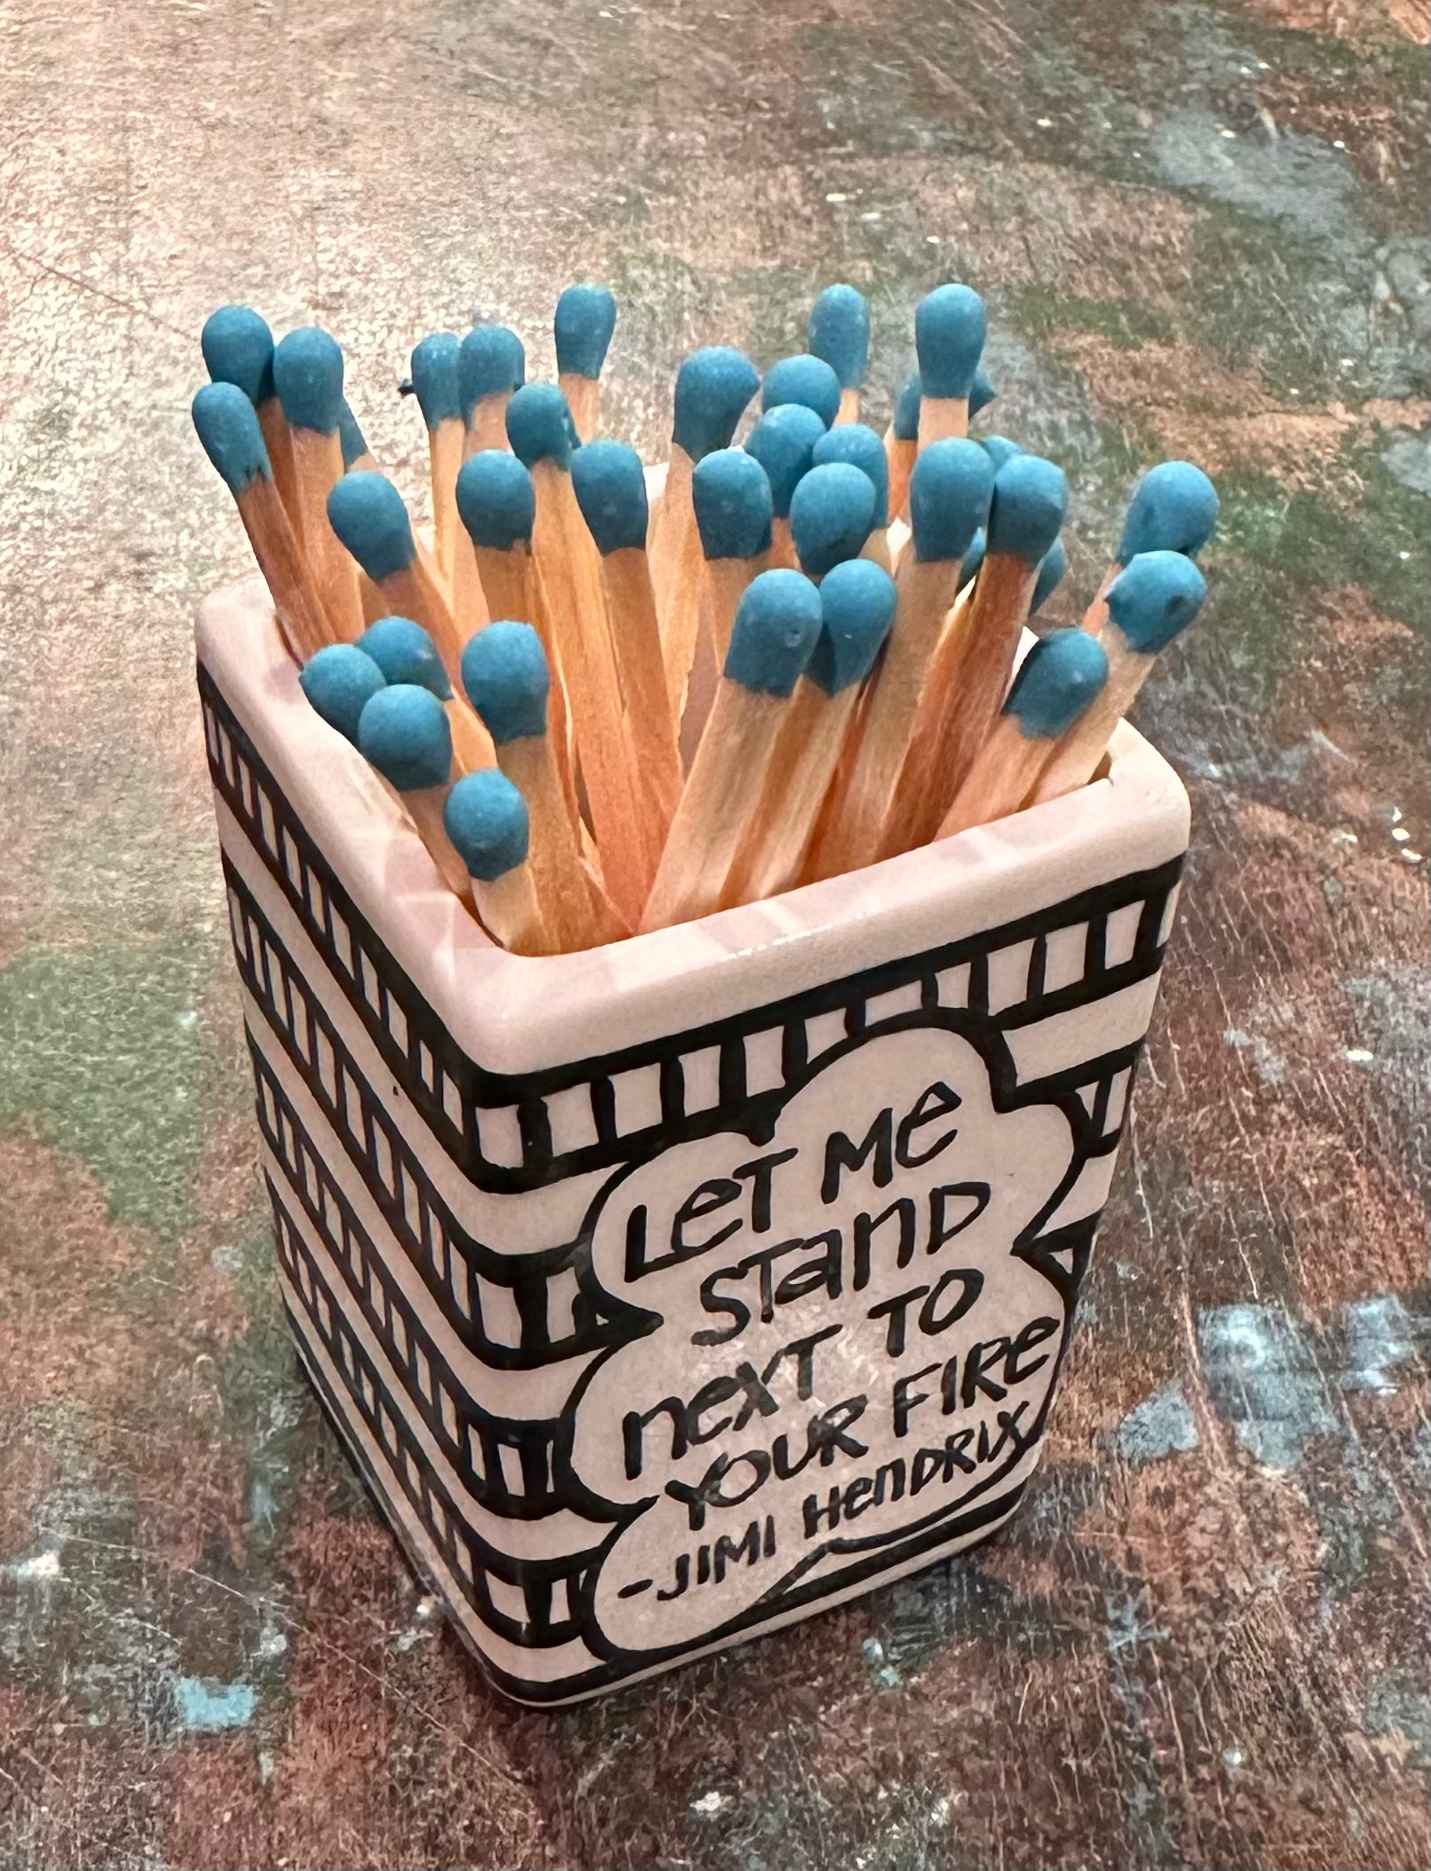 Matchstick Holder "Love is a Burning Thing"